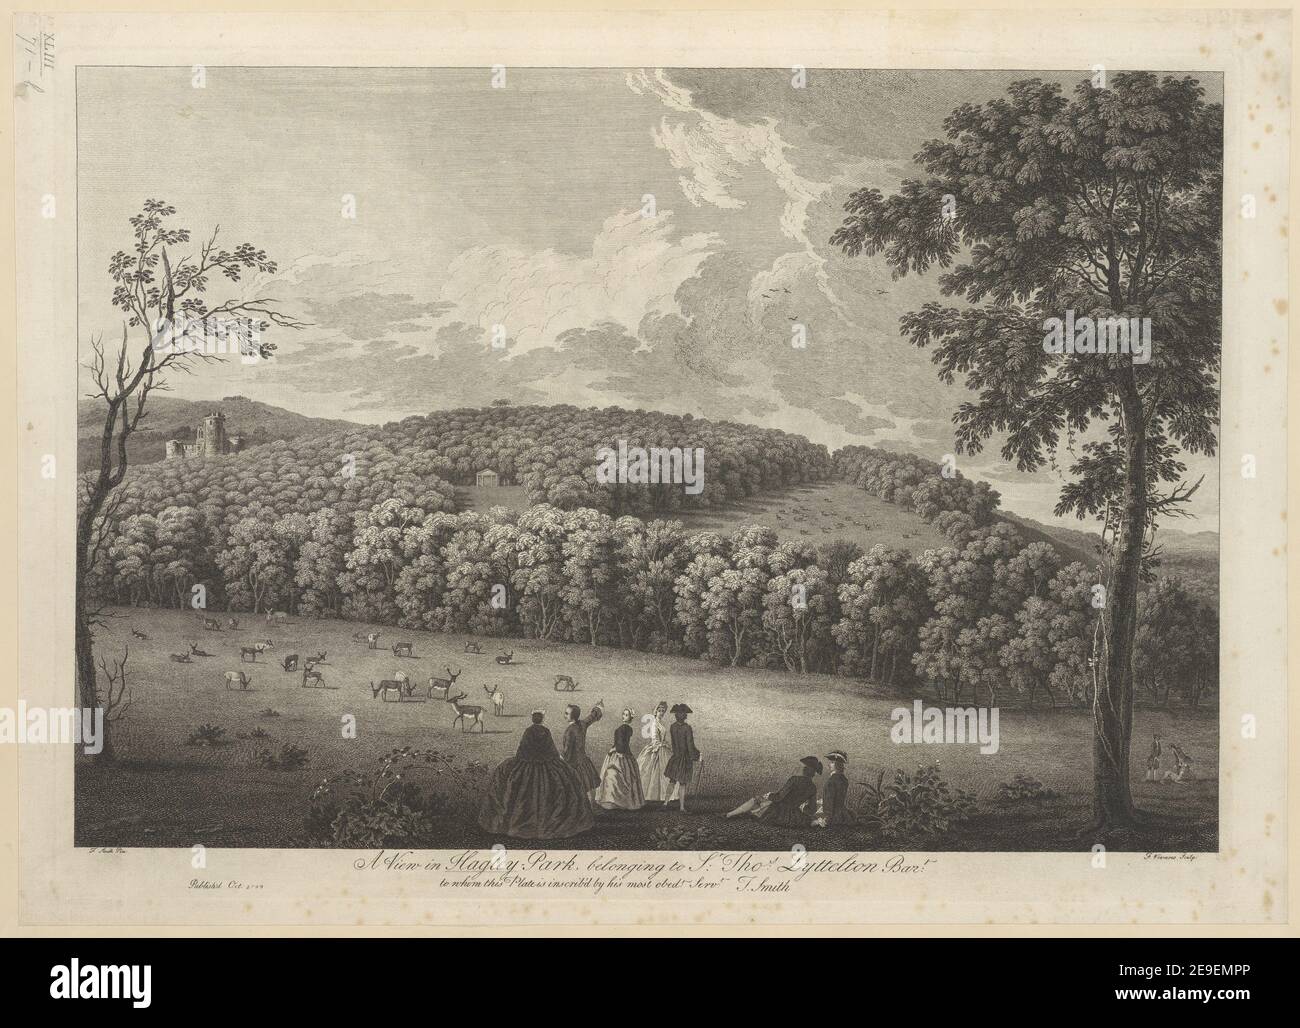 A View in Hagley Park, belonging to Sr: Tho:s Lyttleton Bar.t  Author  VivareÃÄs, FrancÃßois 43.71.b. Place of publication: [London?] Publisher: Publish'd Oct., Date of publication: 1749.  Item type: 1 print Medium: etching and engraving Dimensions: platemark 39.3 x 54.4 cm  Former owner: George III, King of Great Britain, 1738-1820 Stock Photo